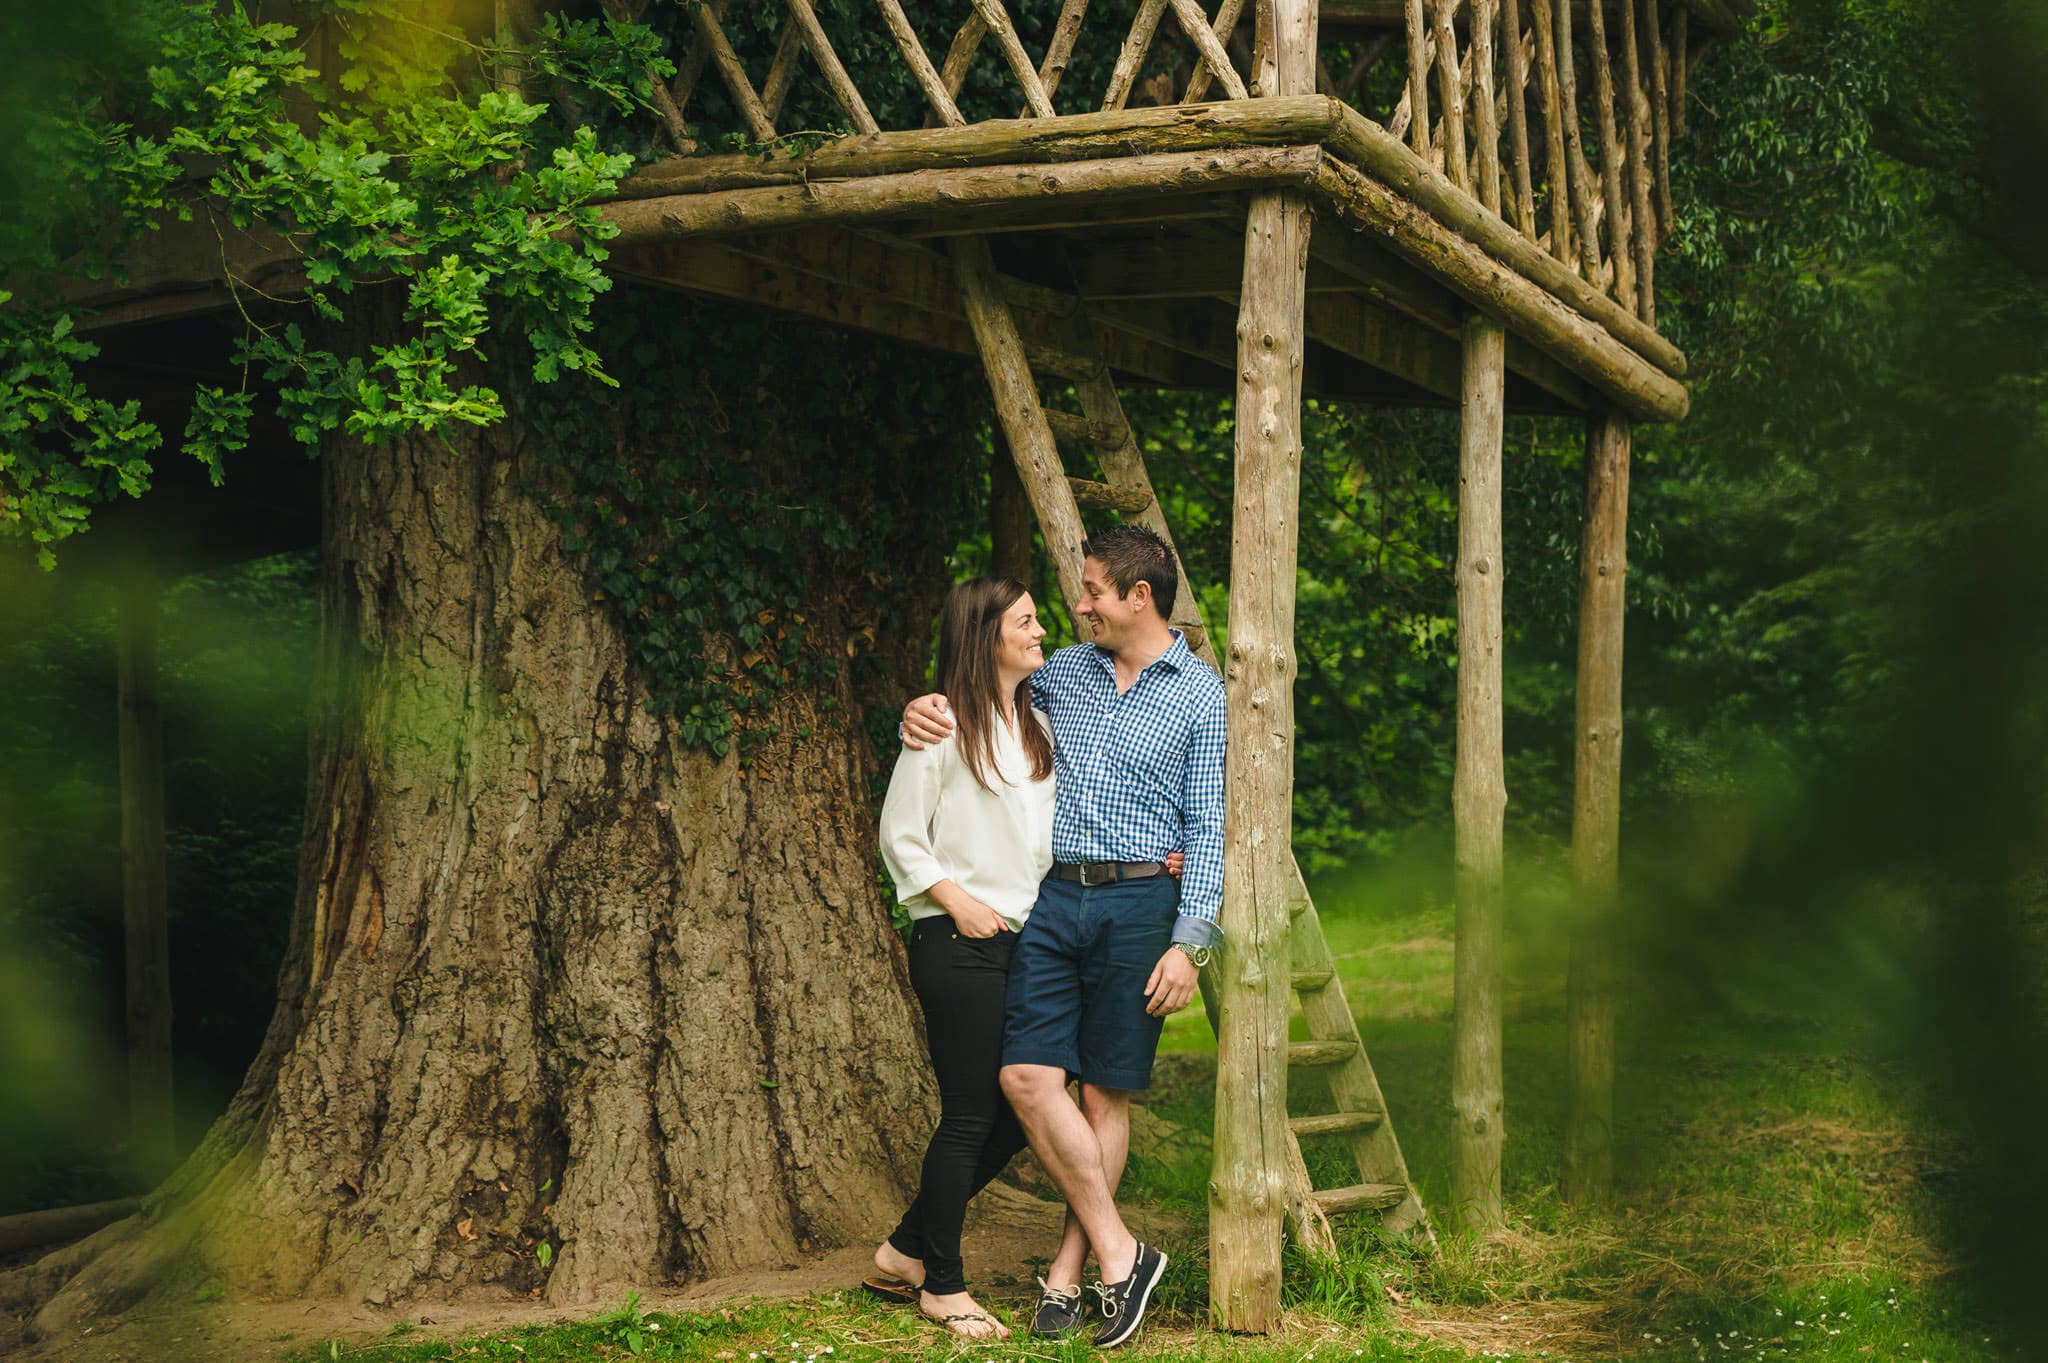 Dean + Sarah's pre wedding photography session in Herefordshire, West Midlands 11